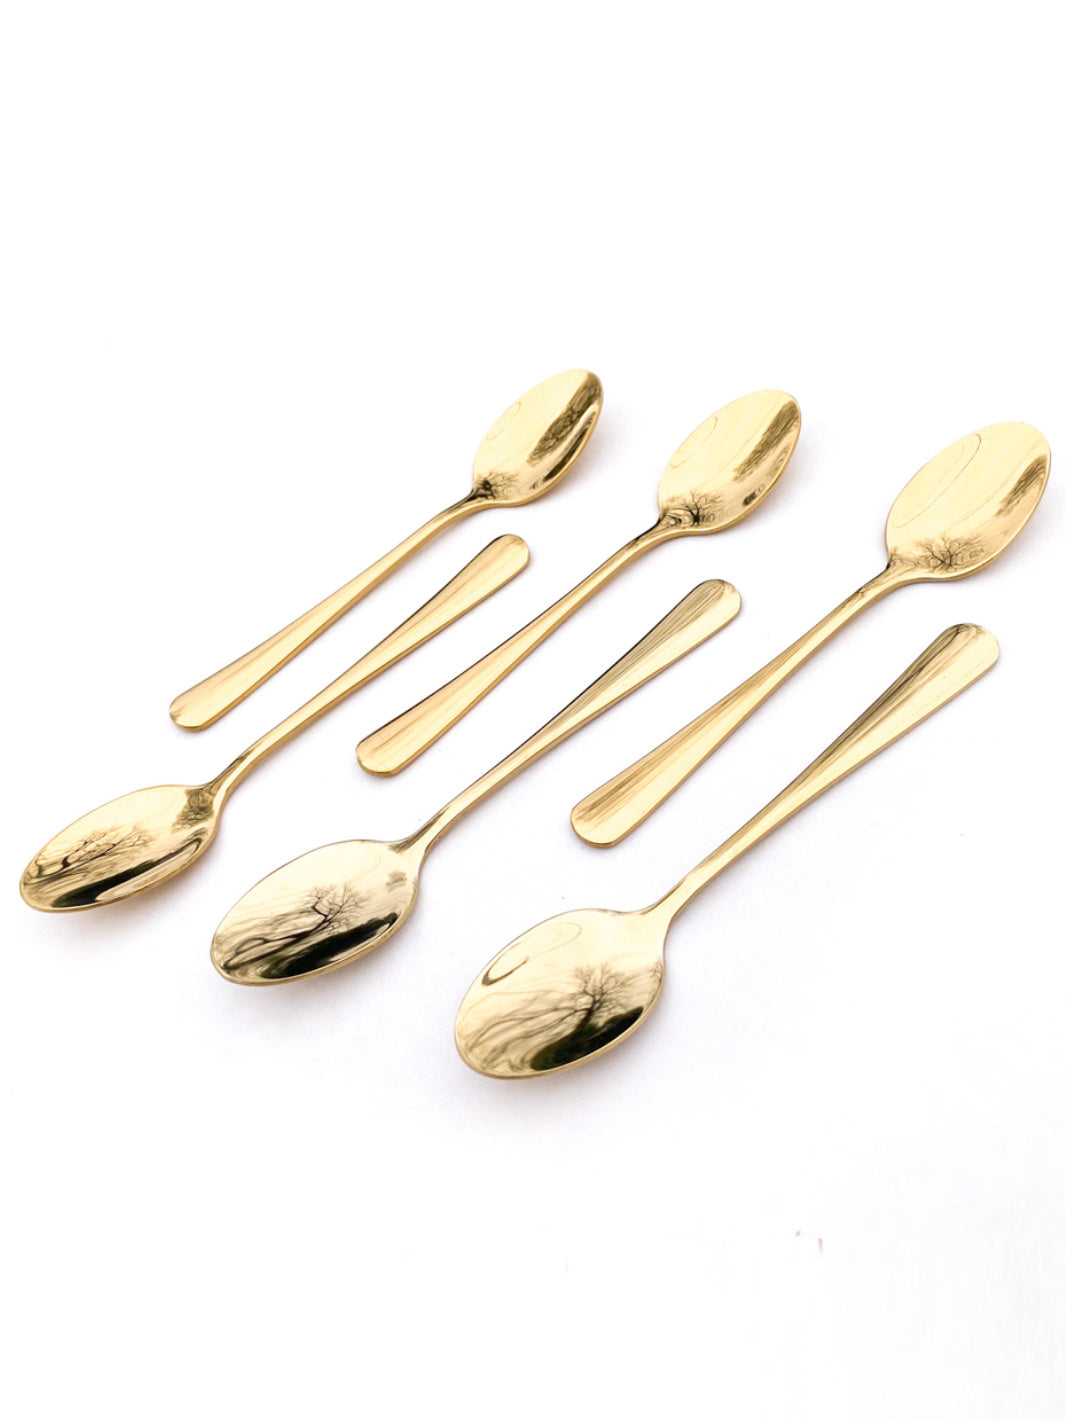 Watris Veiyi 5PCS Short Handle Spoons Small Scoops for Canisters Mini Gold  Sp